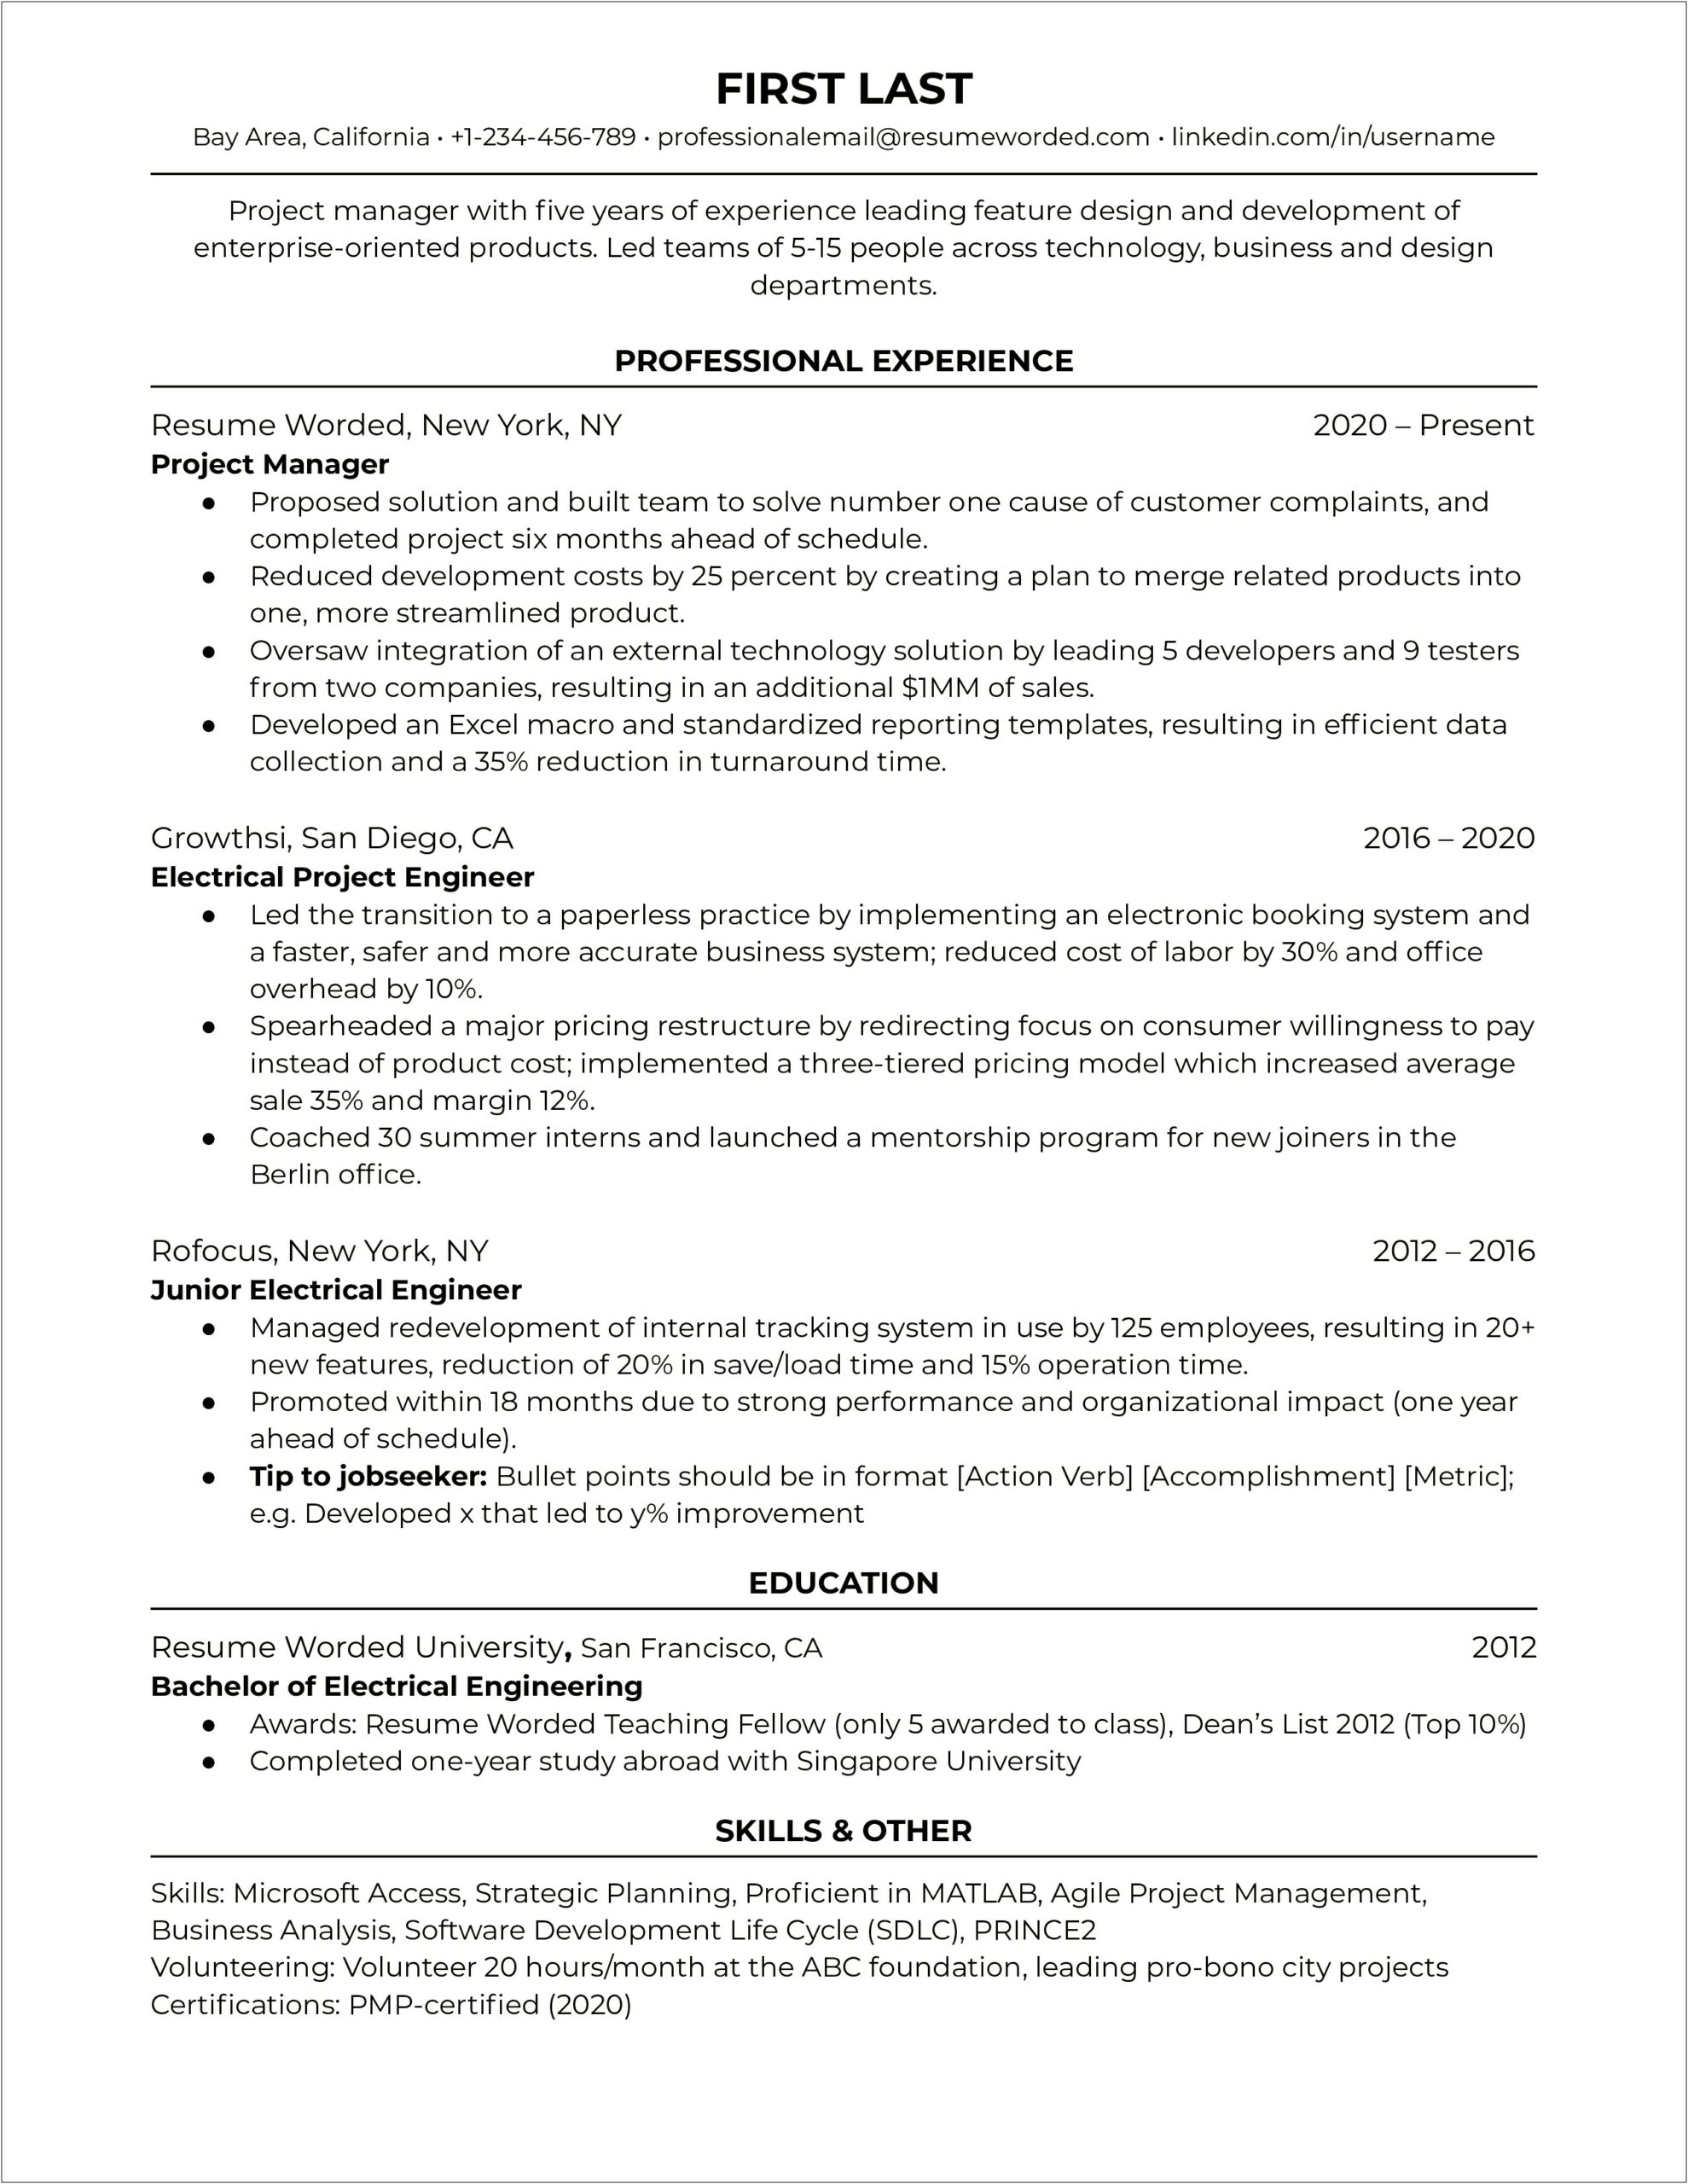 Sample Clinical Research Project Manager Resume